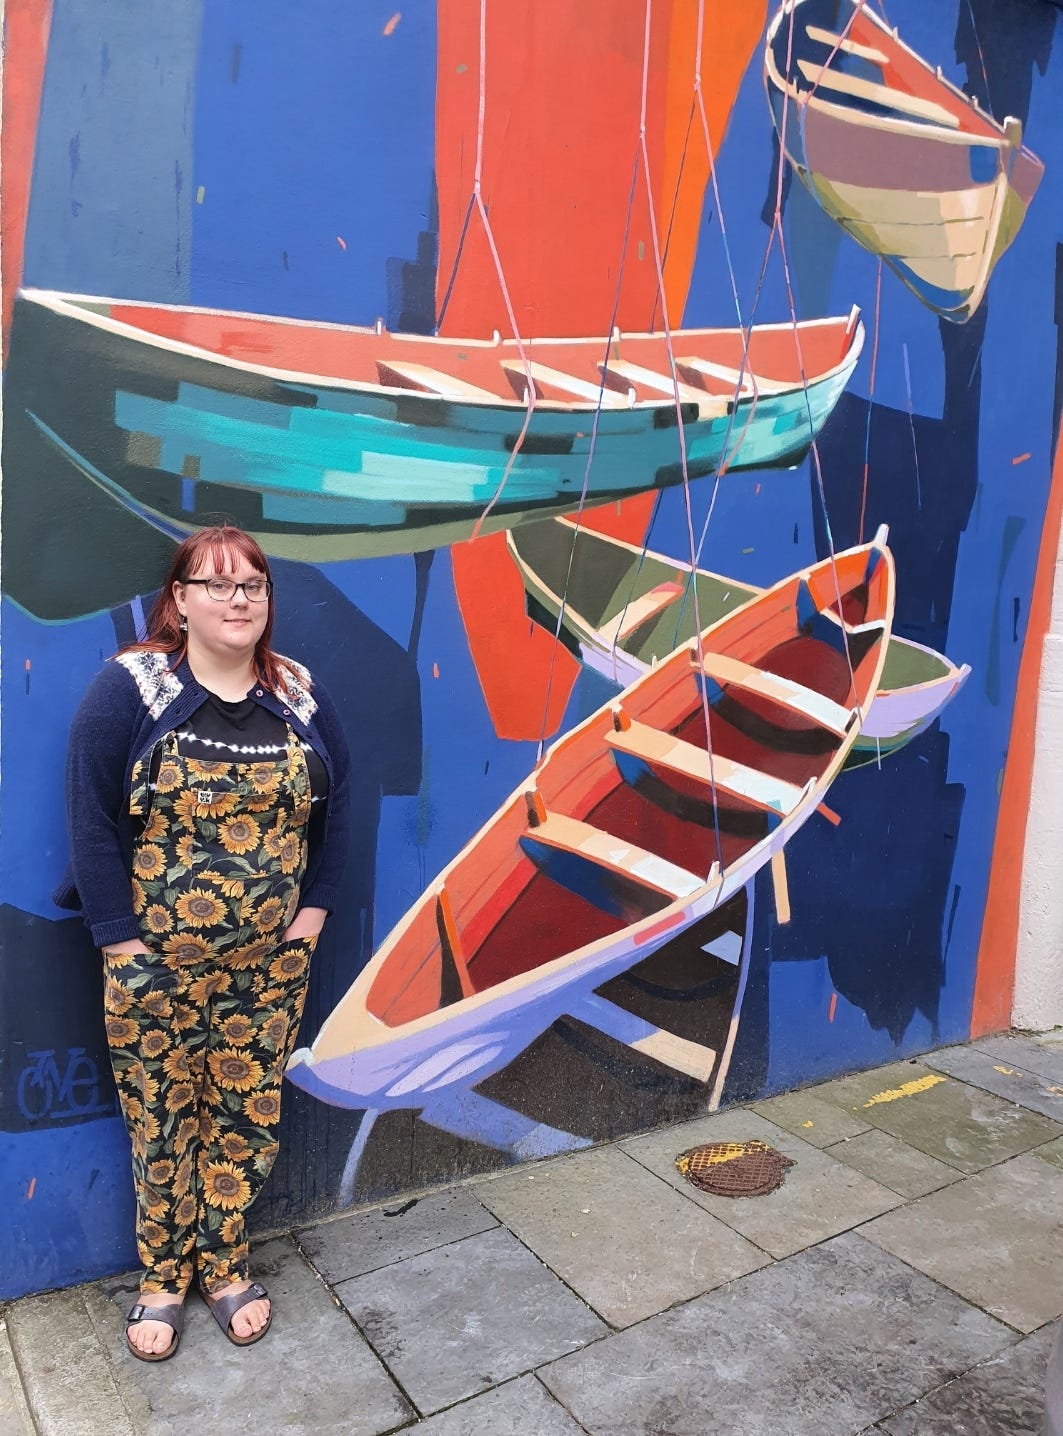 Hannah, aged 34, has dyed red hair, a blue cardigan with a Fair Isle yoke pattern around the neck, a black and white tie dye effect t-shirt, sunflower patterned dungarees, glasses with thick blue frames, and iridescent Birkenstock sandals. She is standing in front of a mural with a blue and orange background and three rowing boats in various colours in its foreground. 